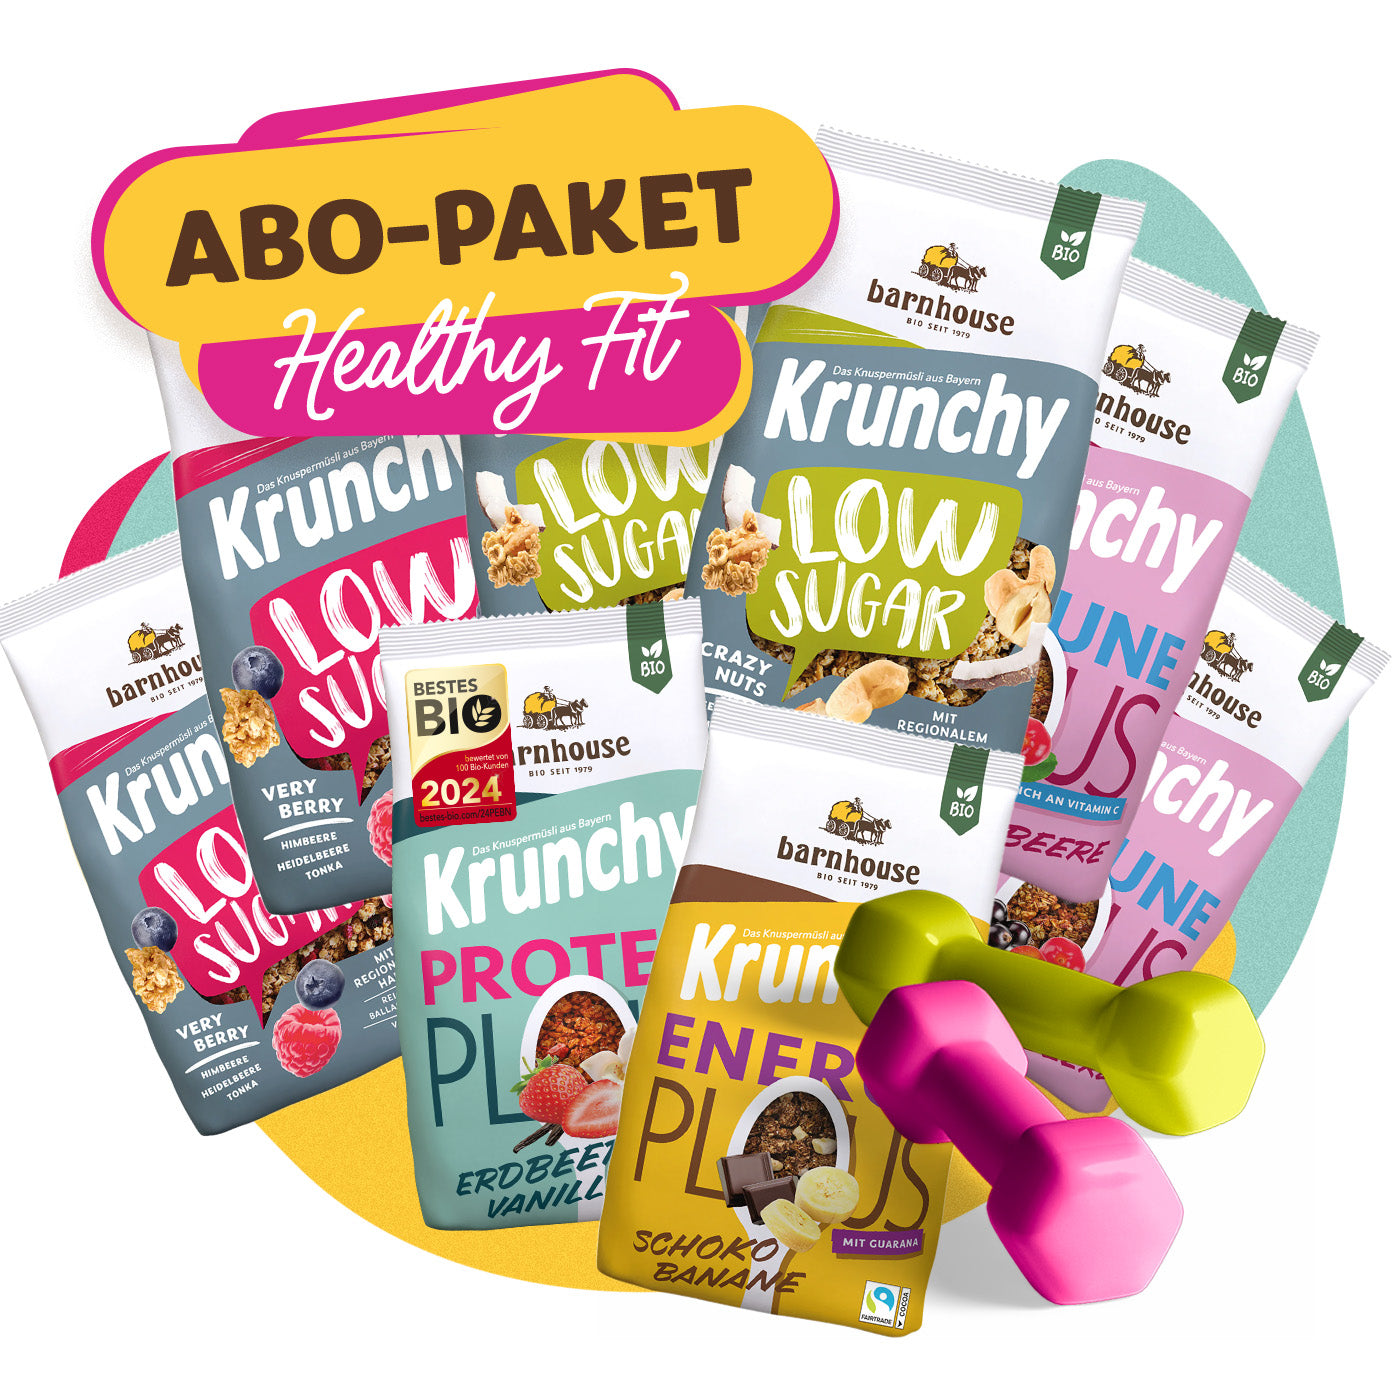 Abo-Paket Healthy Fit